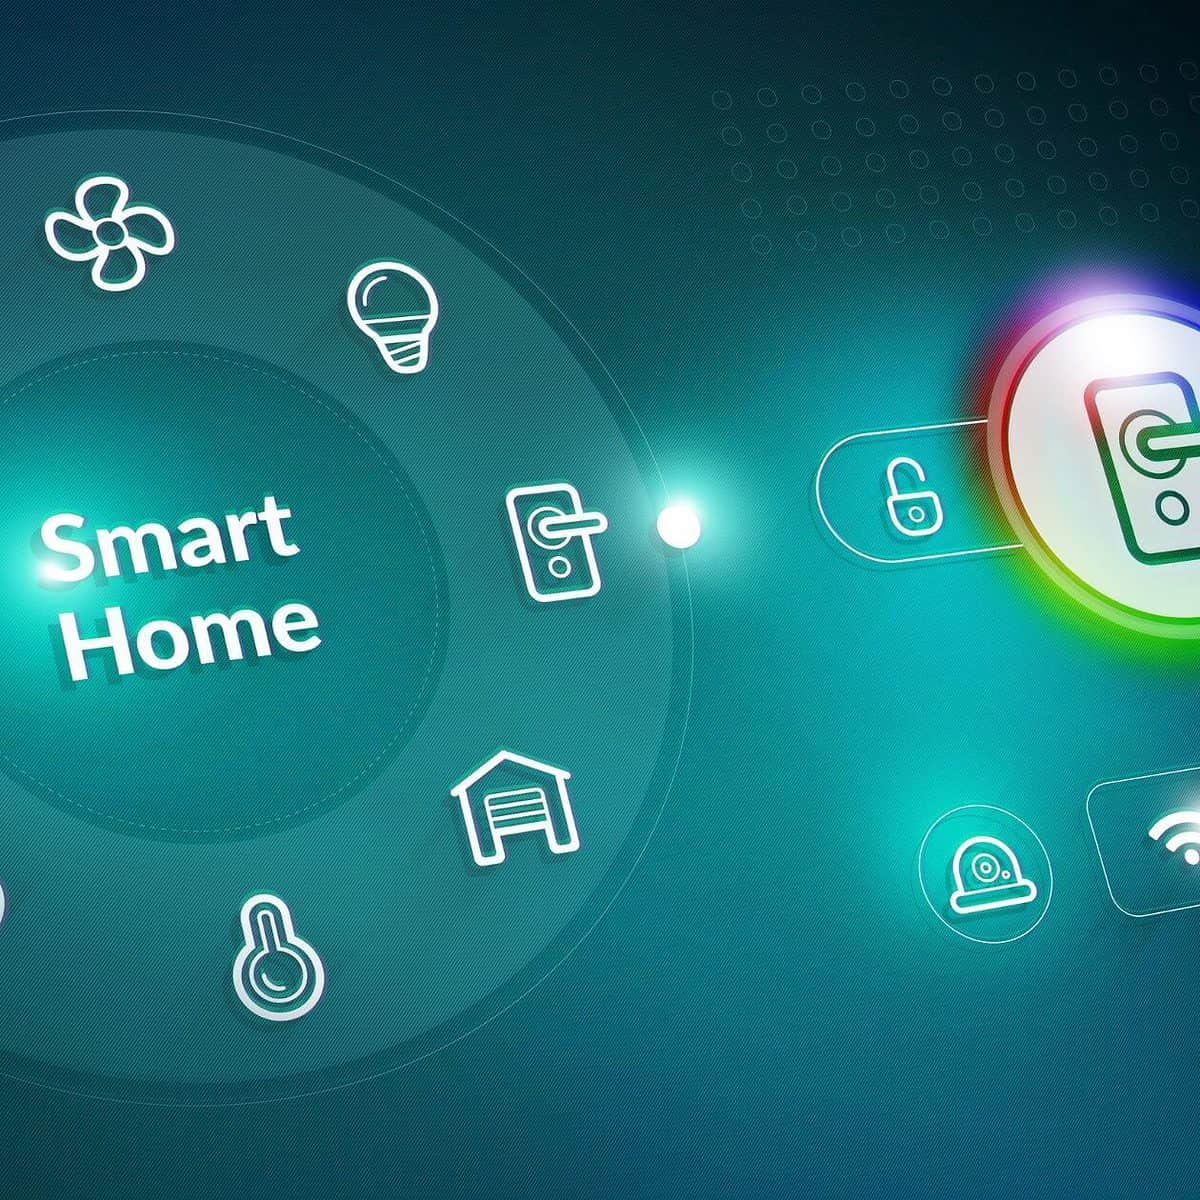 Read more about the article 11 Types Of Home Automation You Can Afford And Make Your Home Smart